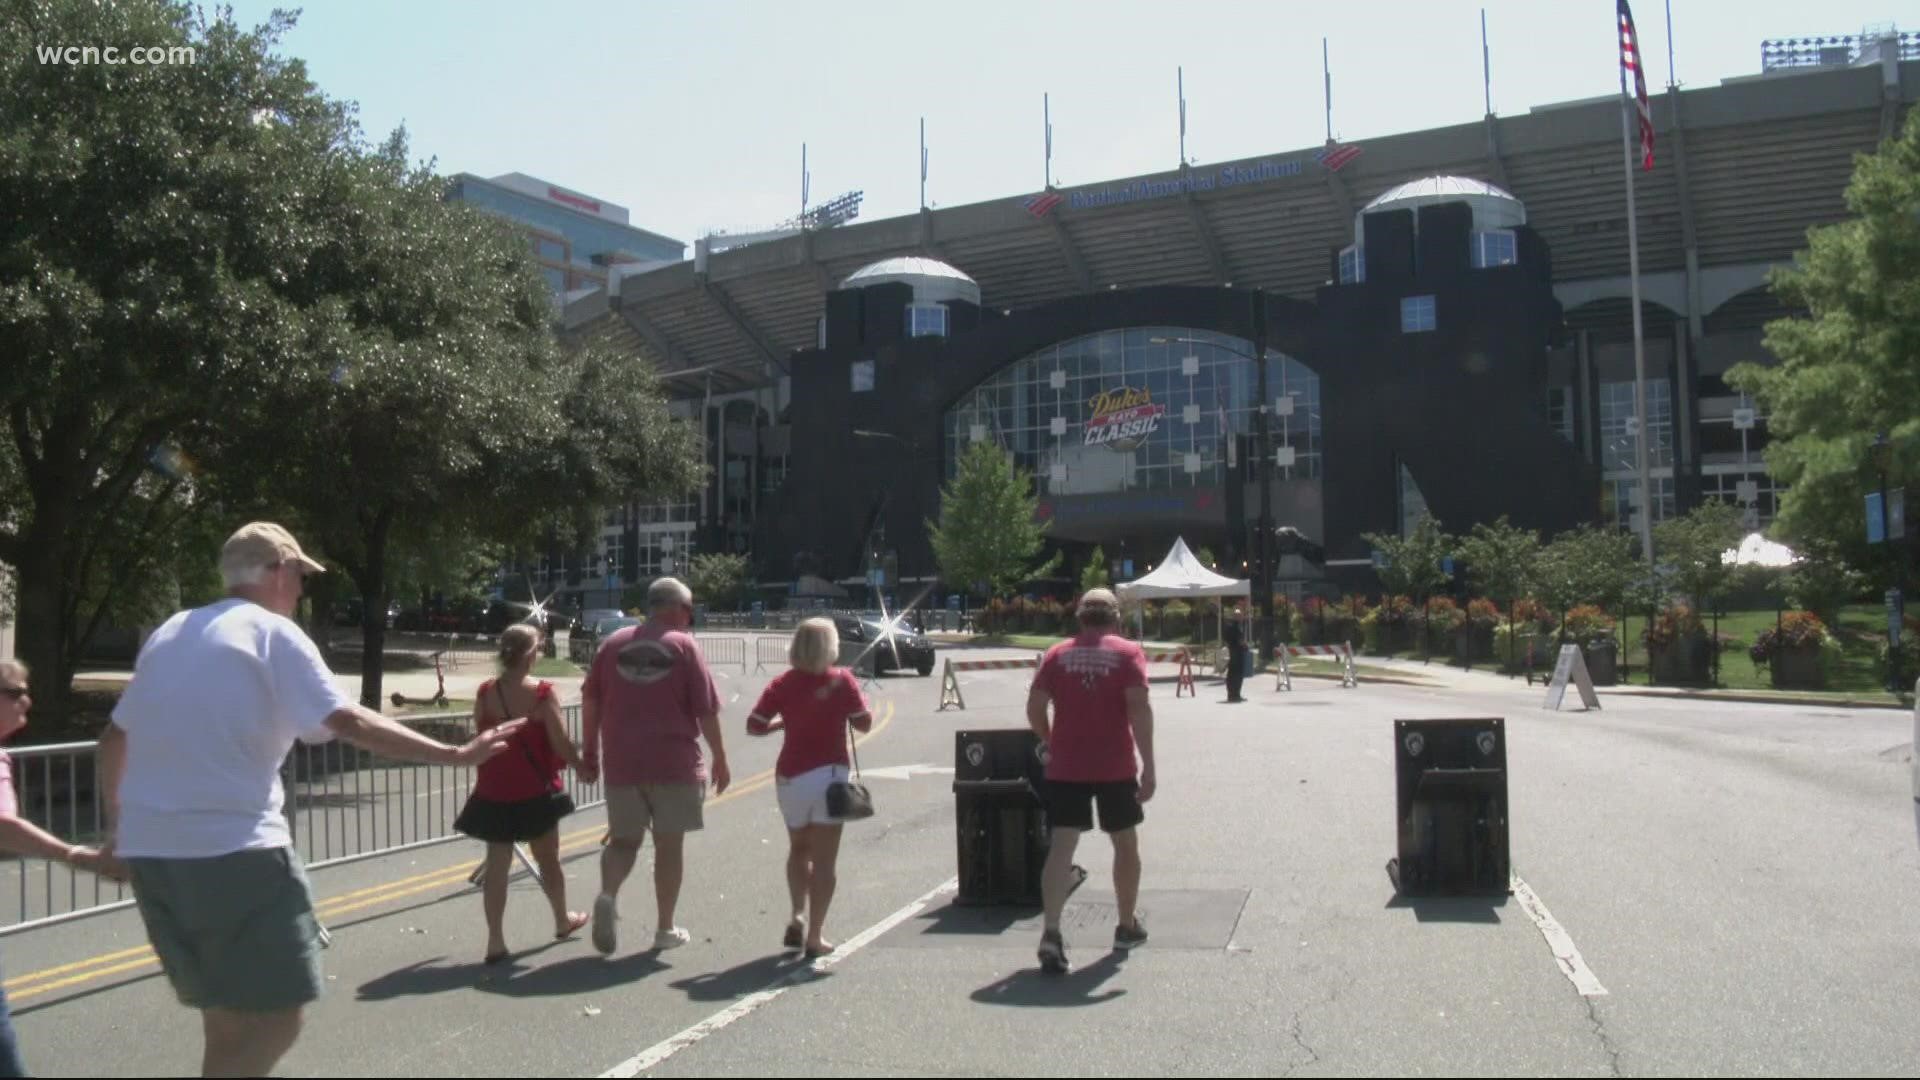 A FanFest in Uptown Charlotte kicks off at 6:30 p.m. to get fans excited for the Georgia vs. Clemson game.